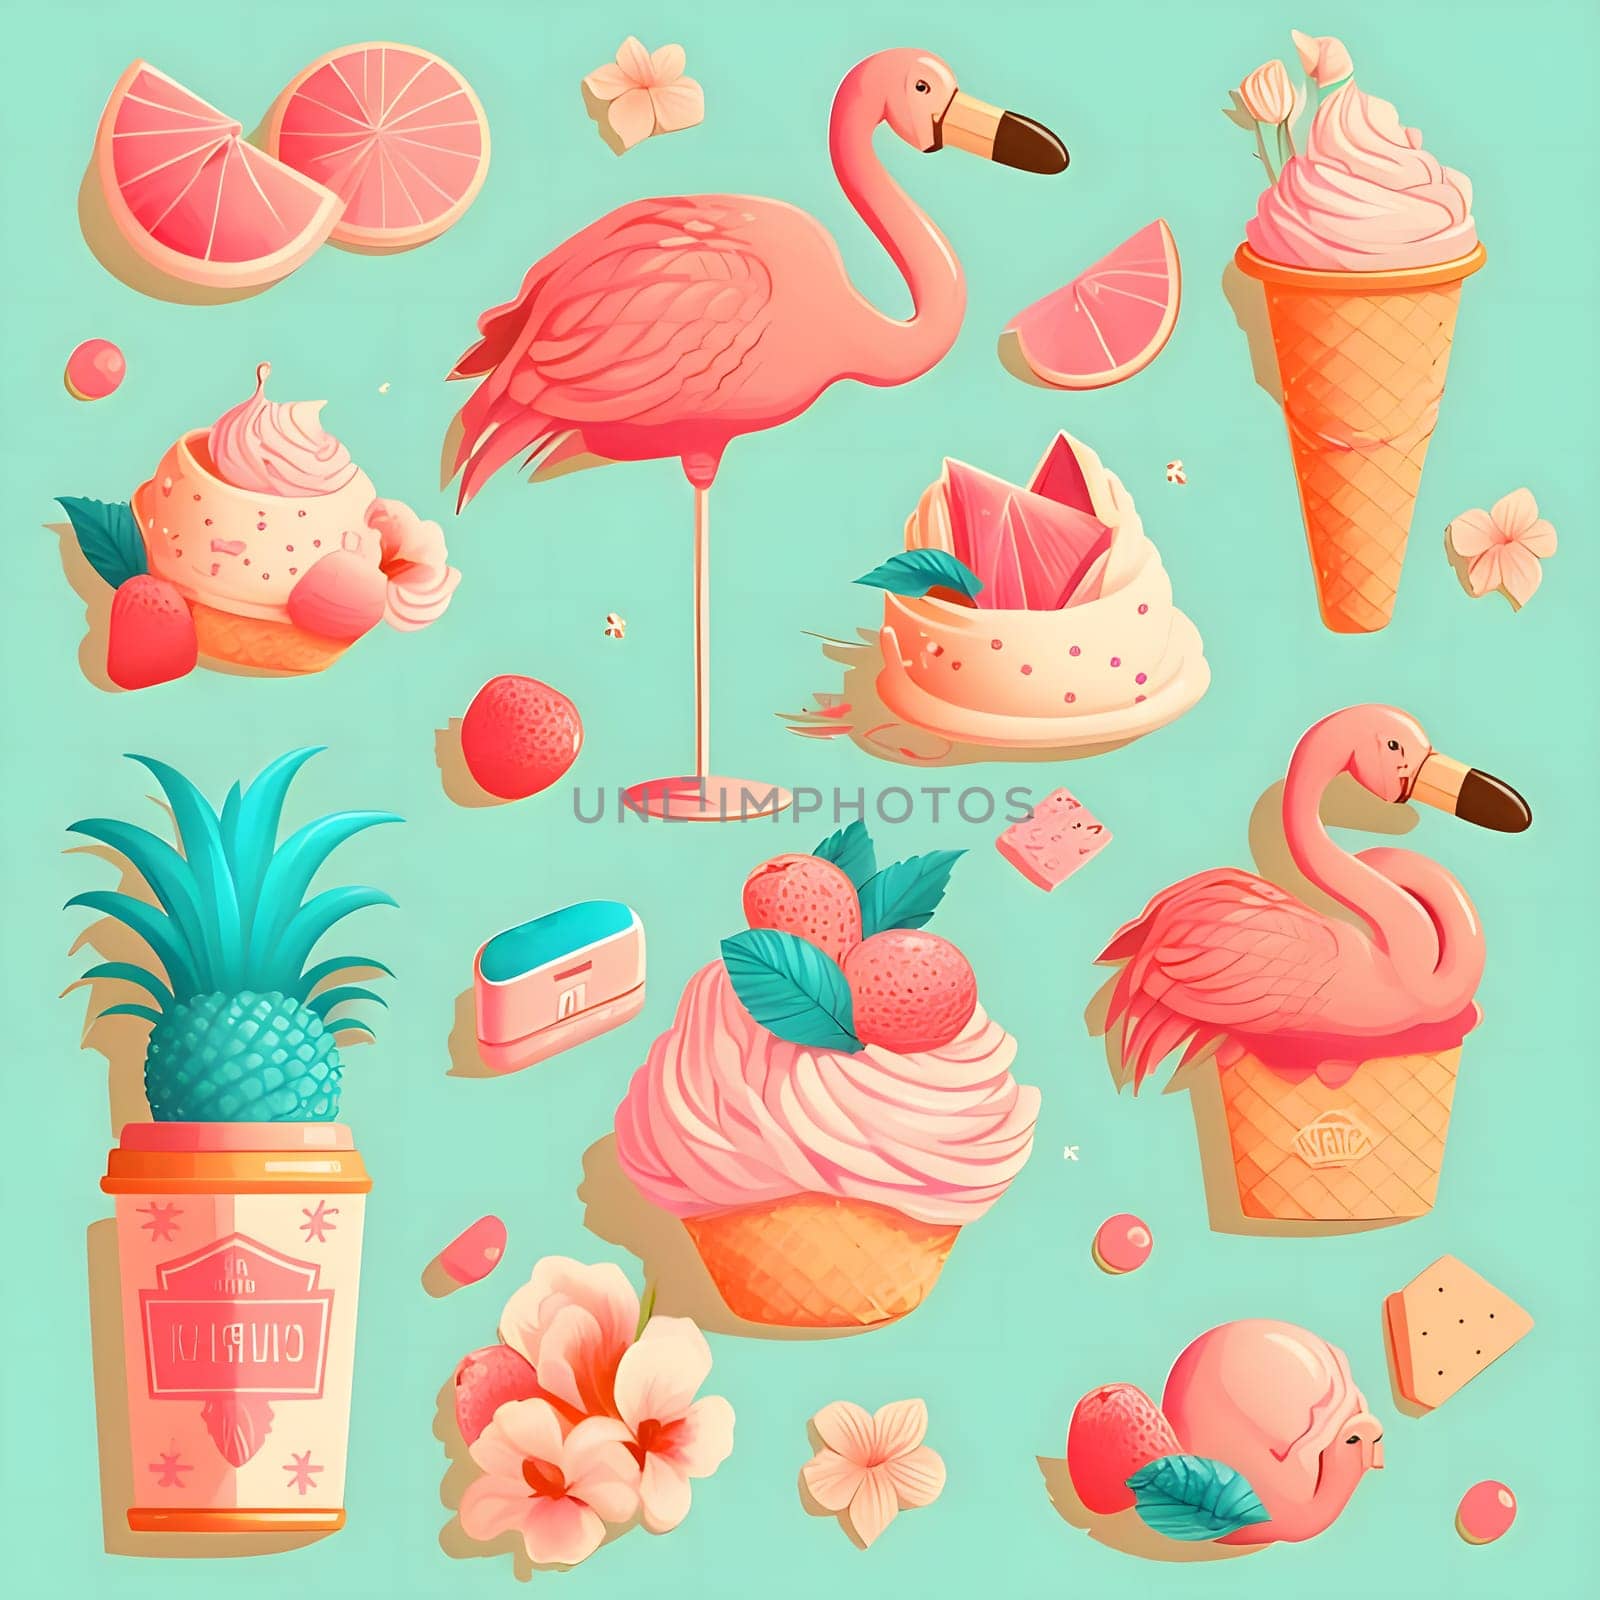 Patterns and banners backgrounds: Flamingo, ice cream, strawberry, pineapple, watermelon and other summer elements on mint background.